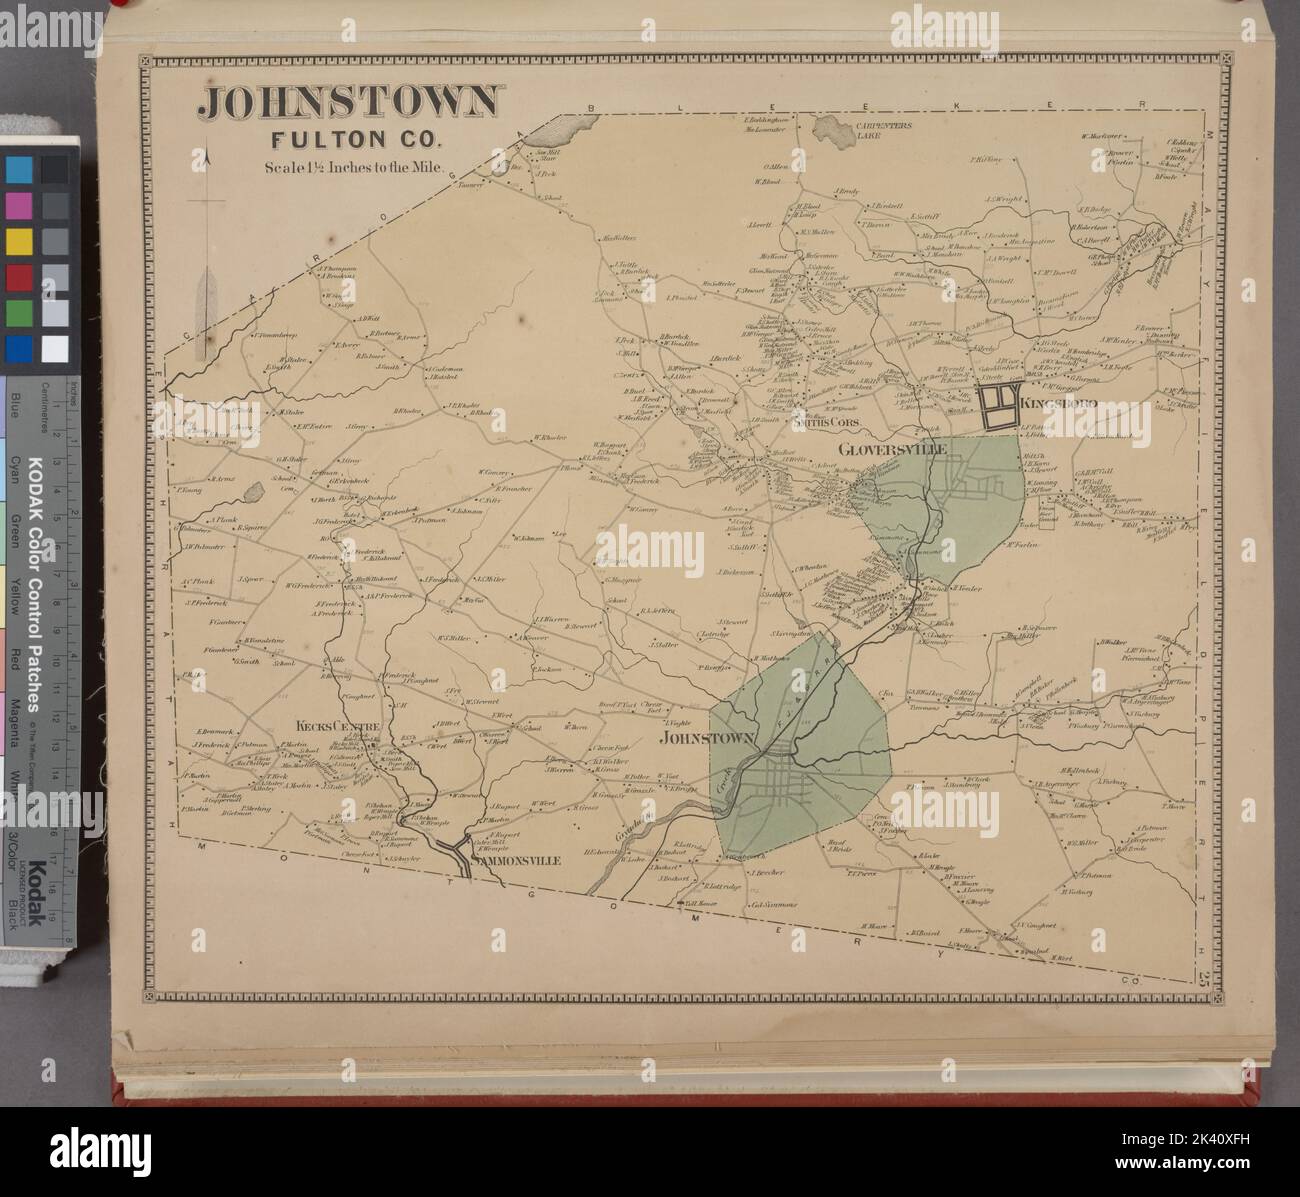 Johnstown Fulton Co. Township Cartographic. Atlases, Maps. 1868. Lionel Pincus and Princess Firyal Map Division. Real property , New York (State) , Montgomery County, Real property , New York (State) , Fulton County, Montgomery County (N.Y.), Fulton County (N.Y.) Stock Photo